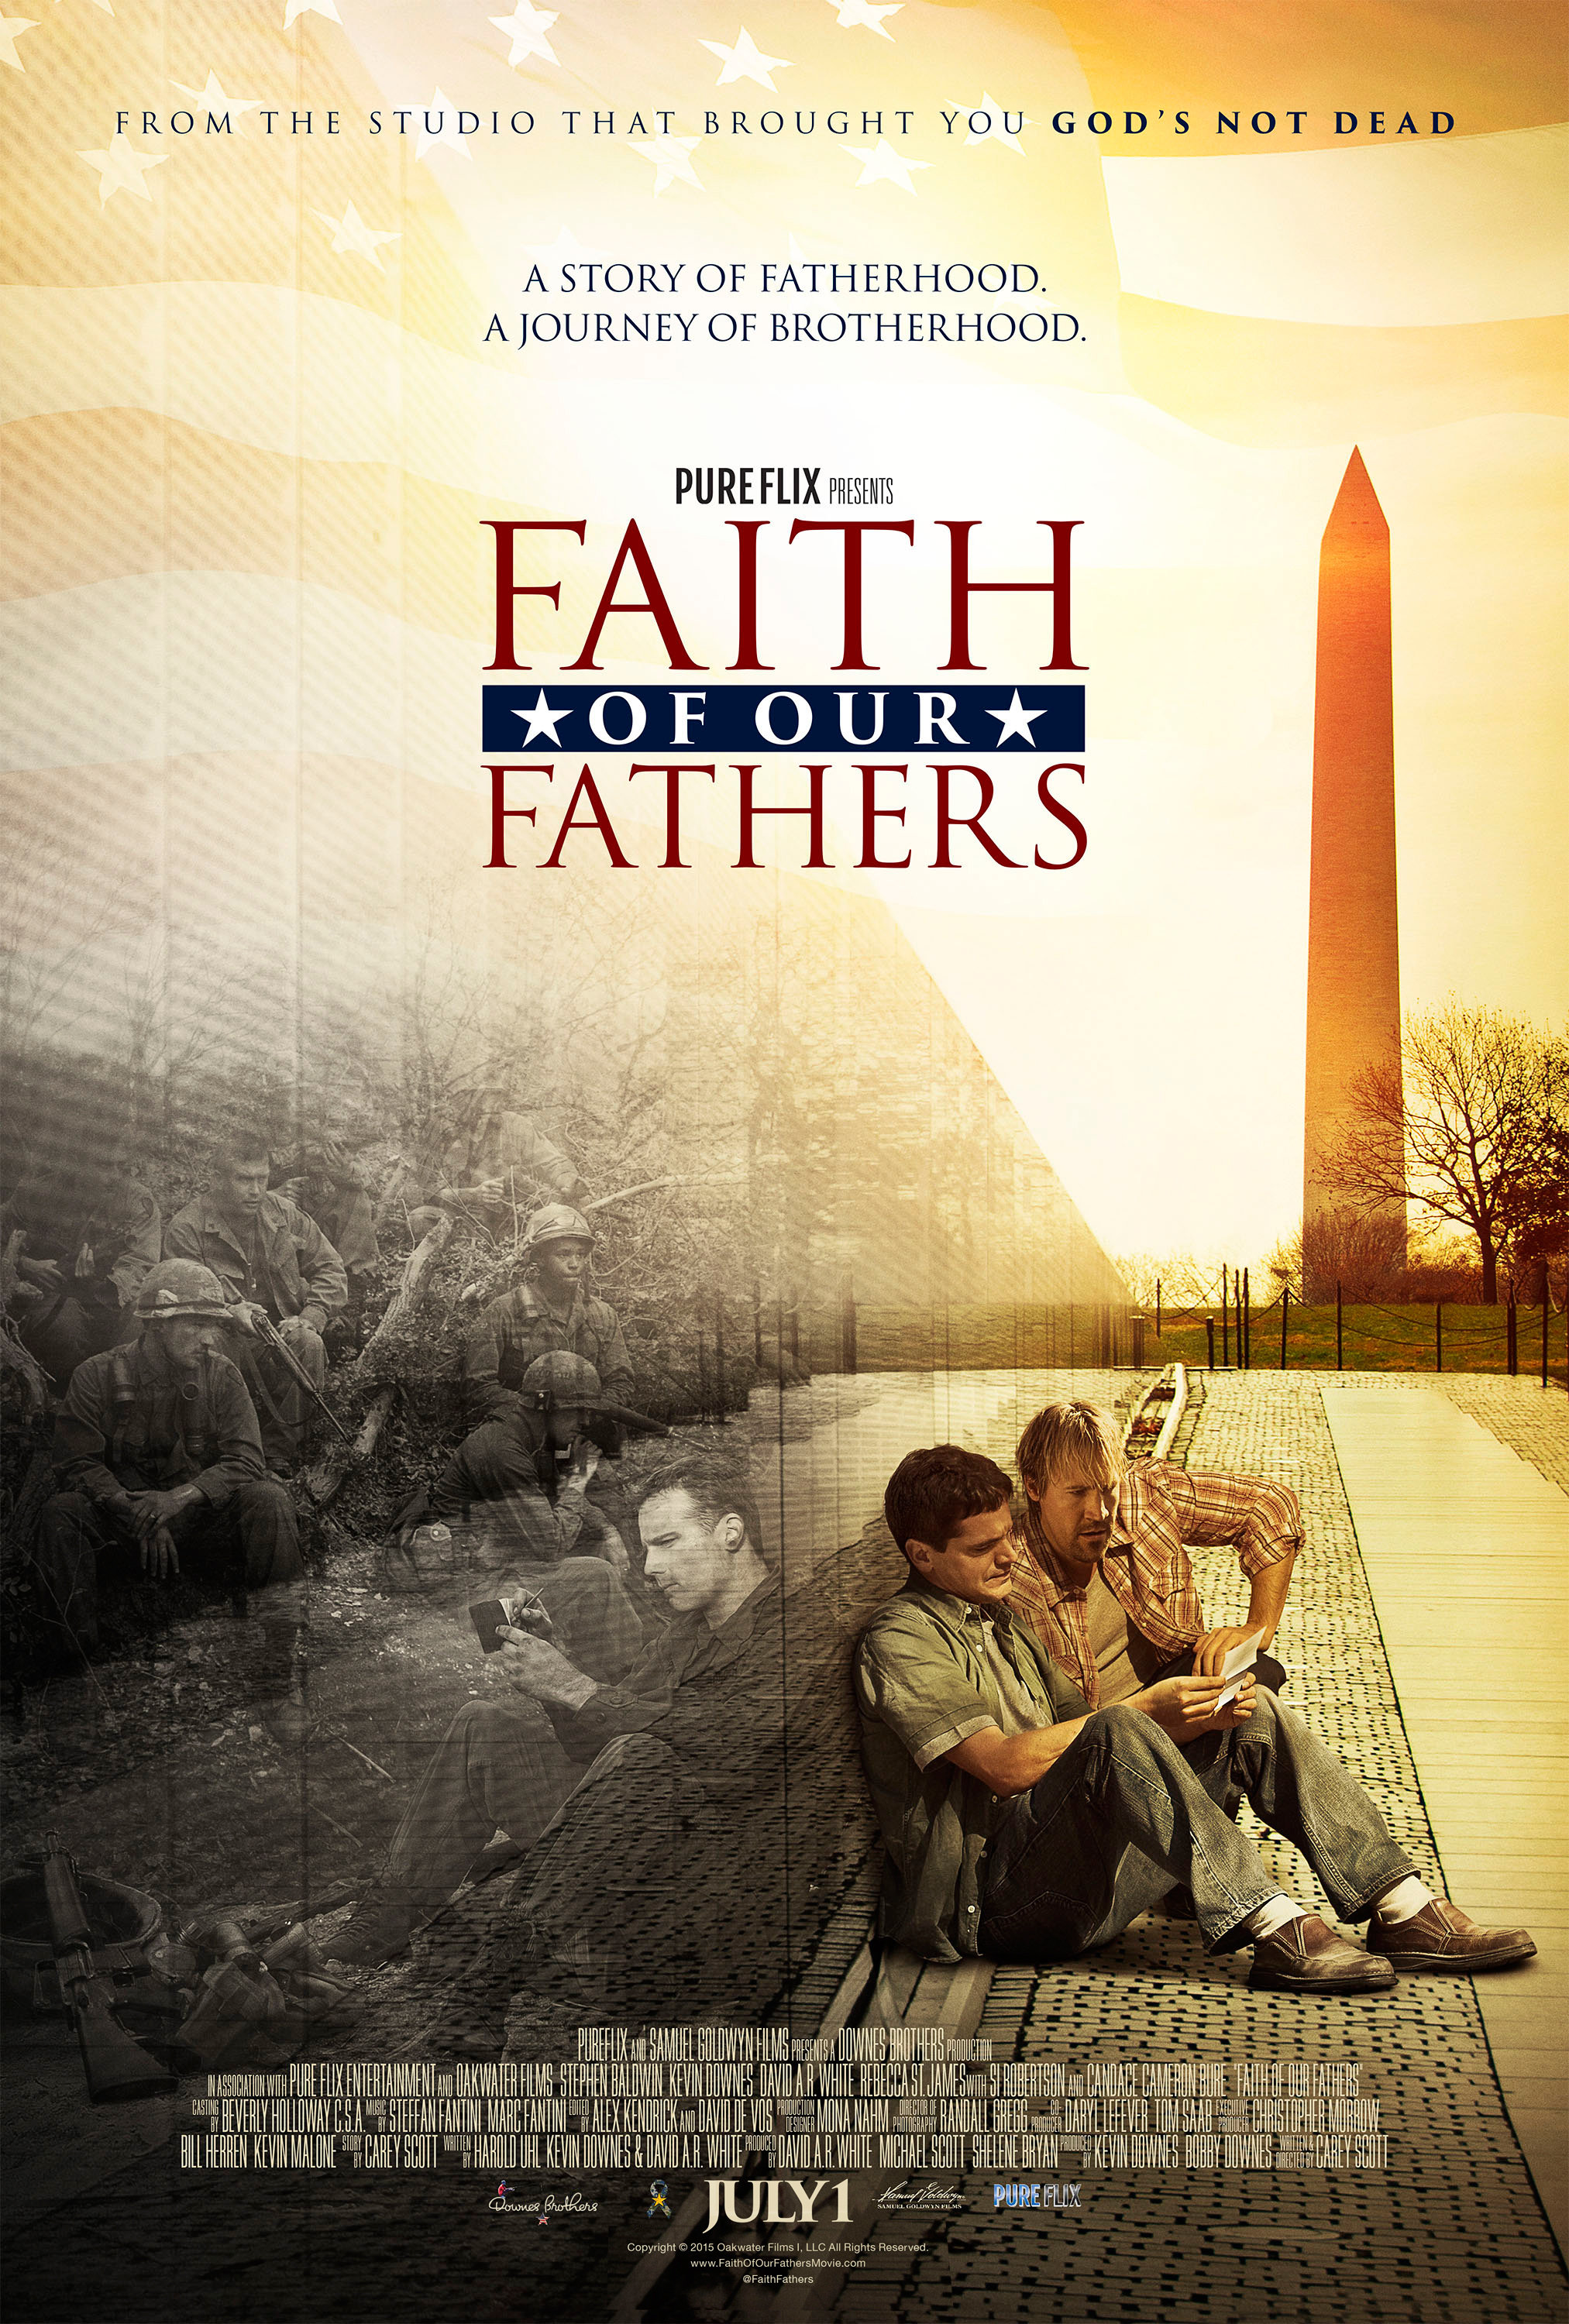 Faith of Our Fathers: a story of fatherhood, a journey of brotherhood. Starring Stephen Baldwin, Kevin Downes, David A.R. White, Rebecca St. James with Si Robertson and Candace Cameron Bure.